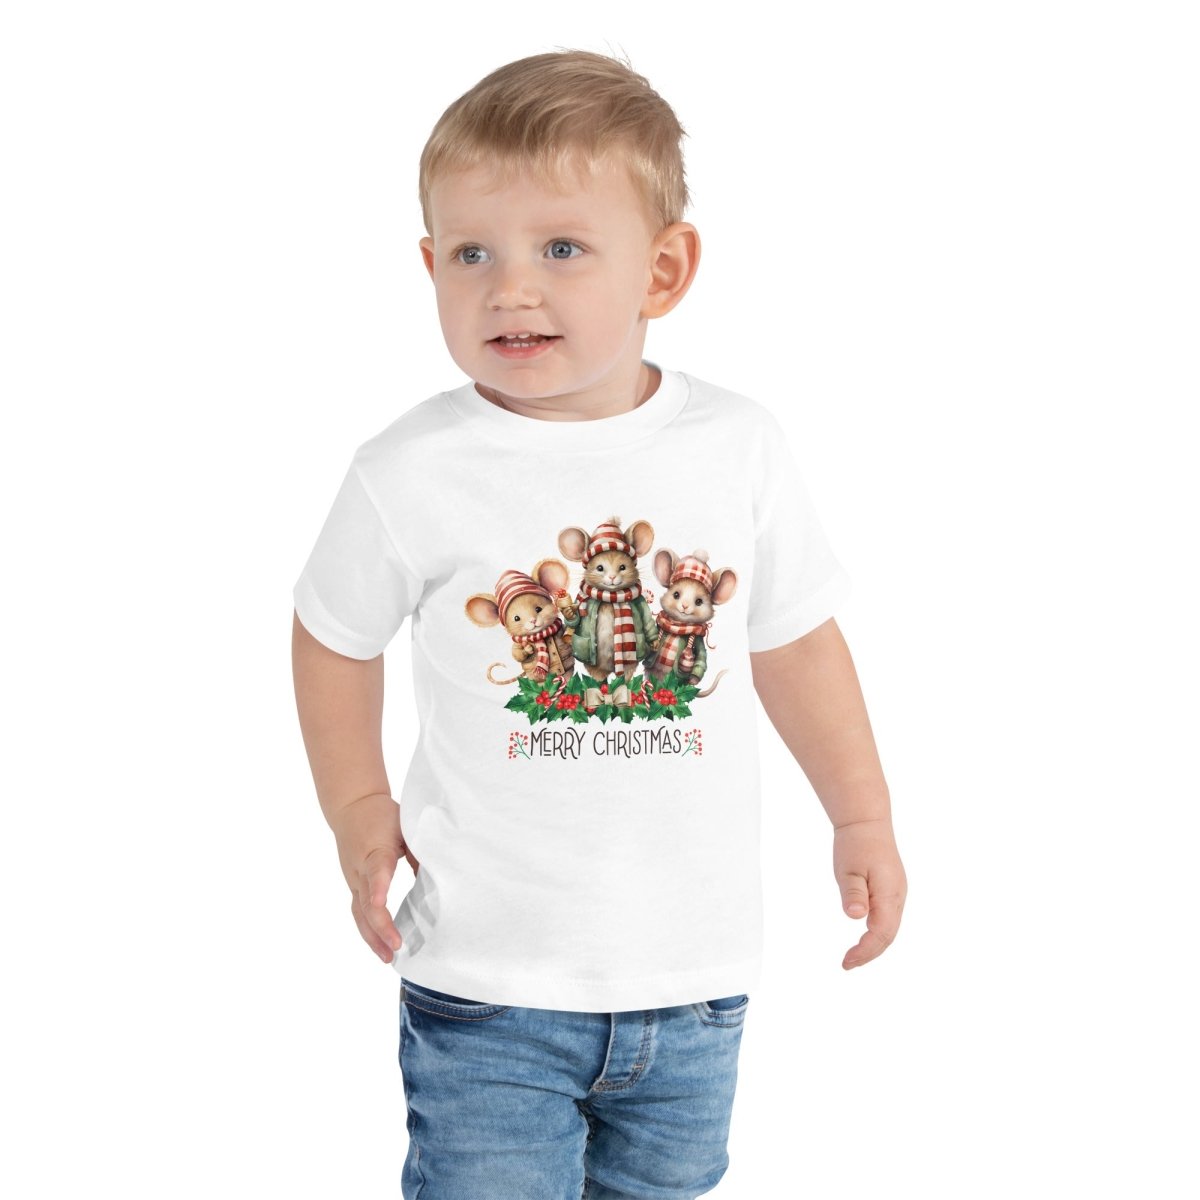 Christmas Mice T-Shirt - High Quality Festive Family Children T-Shirt, Family Reunion Tee, Toddler Holiday Shirt, Christmas Vacation Tee - Everything Pixel